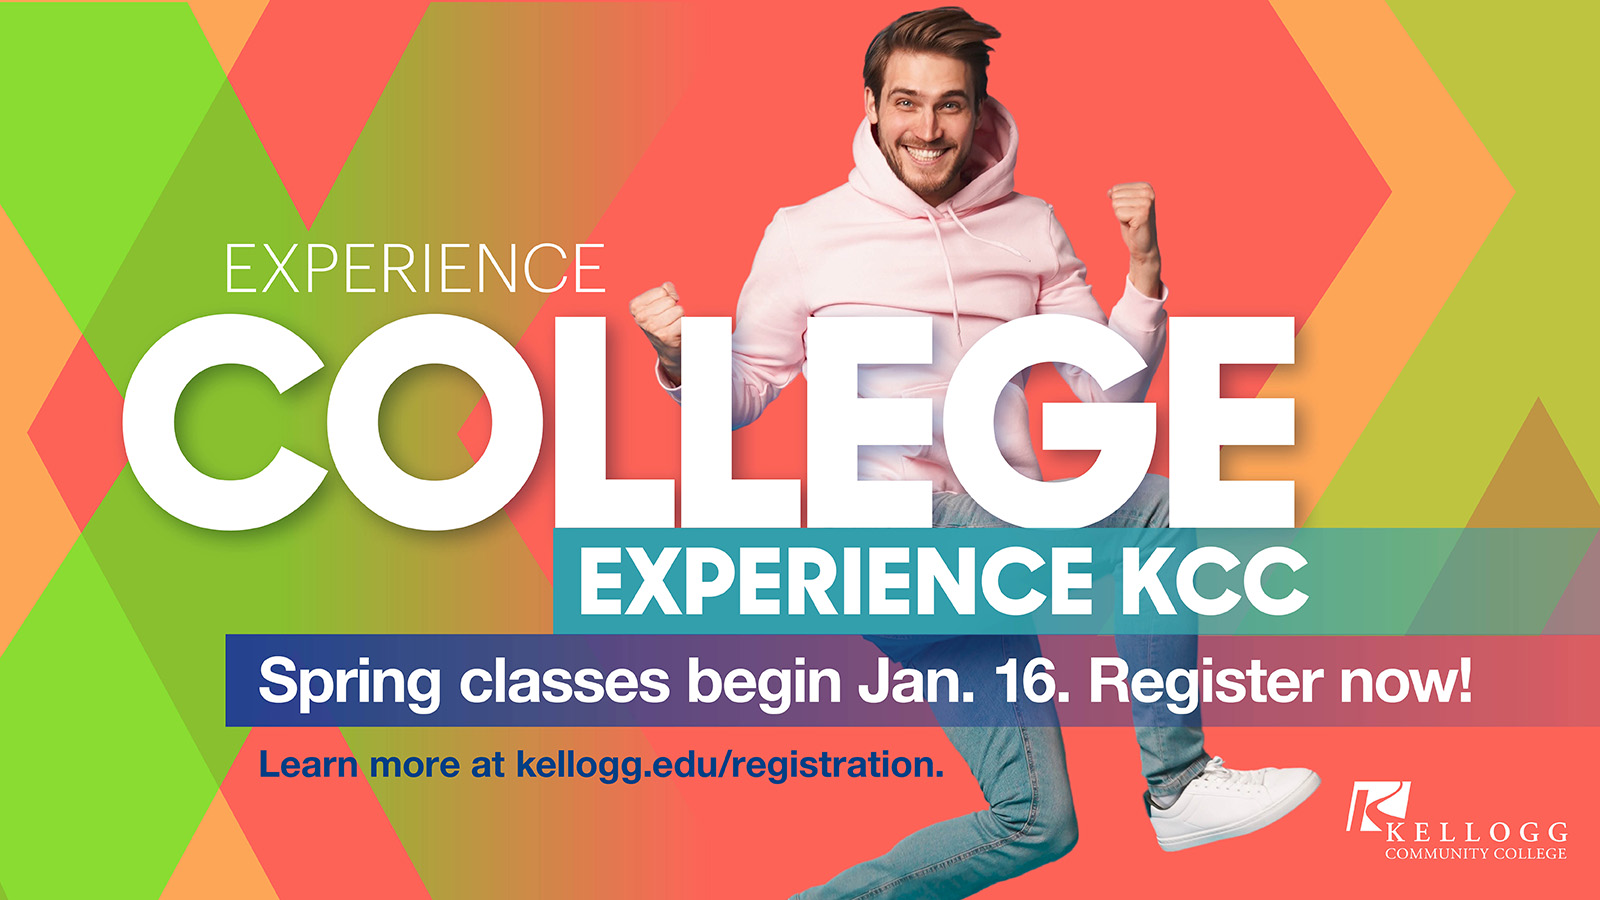 A male student smiles while jumping on a text slide that reads, "Experience college. Experience KCC. Spring classes begin Jan. 16. Register now! Learn more at kellogg.edu/registration."